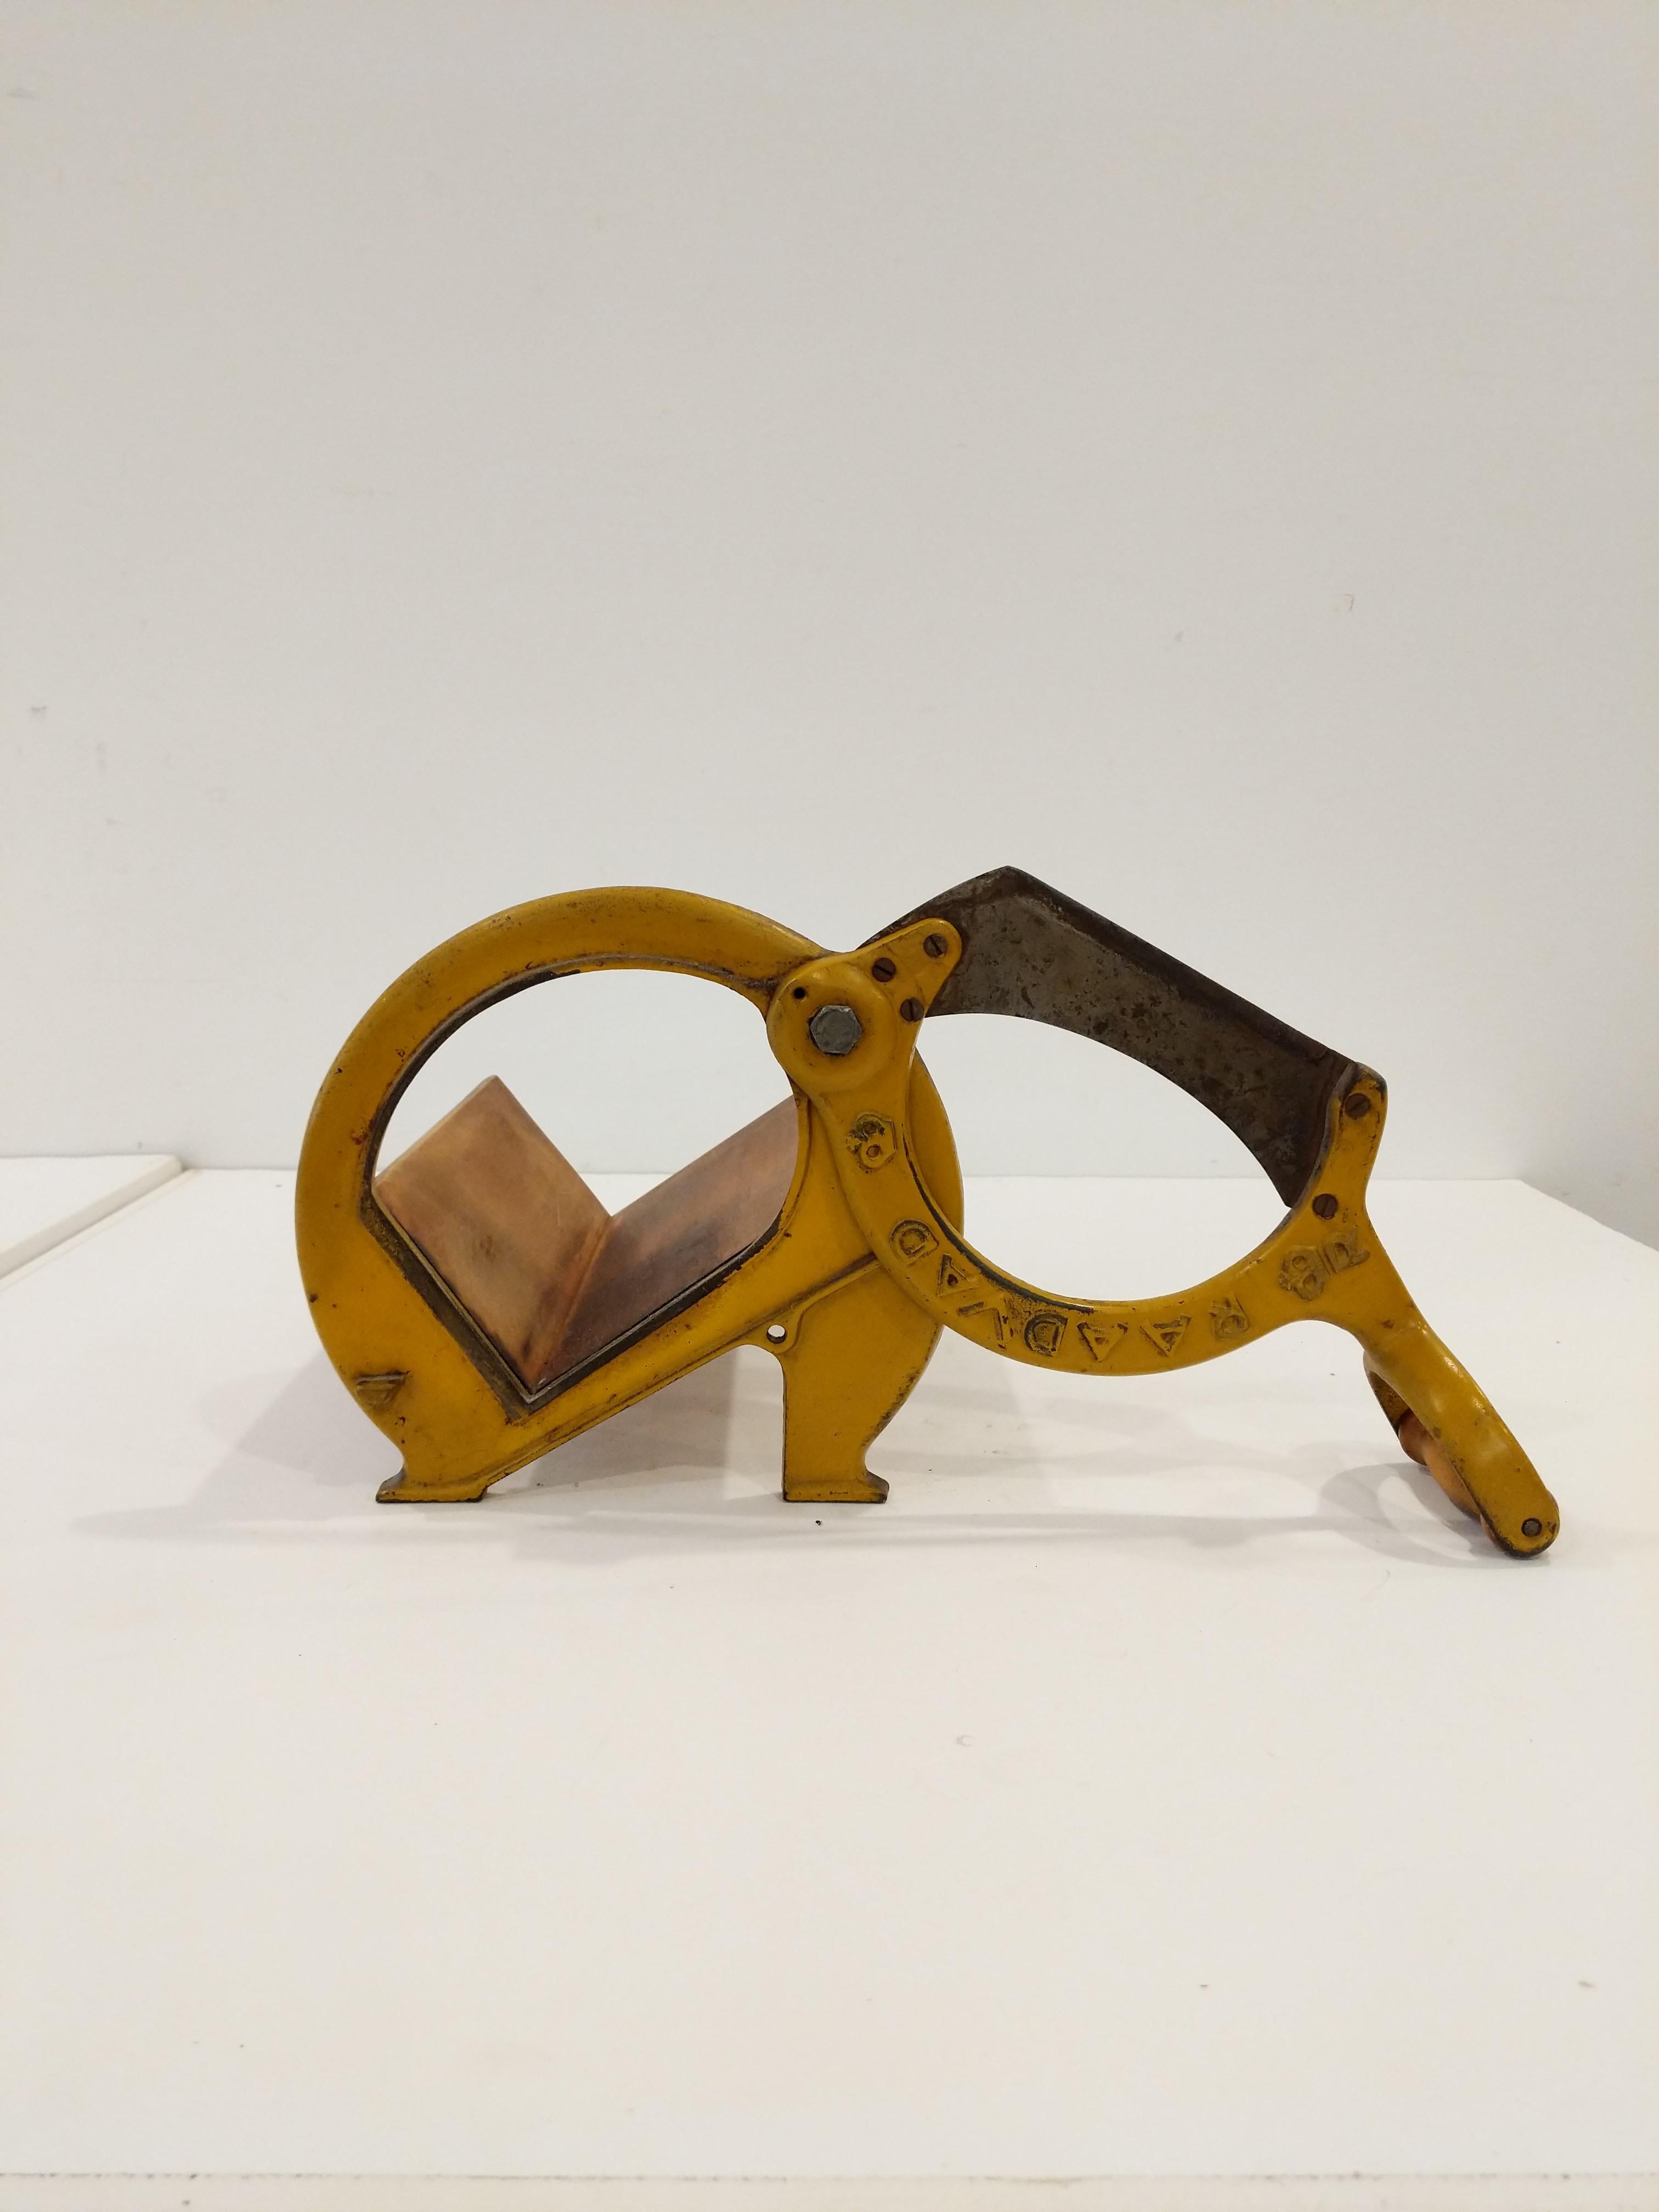 Vintage Raadvad Bread Slicer In Good Condition For Sale In Gardiner, NY